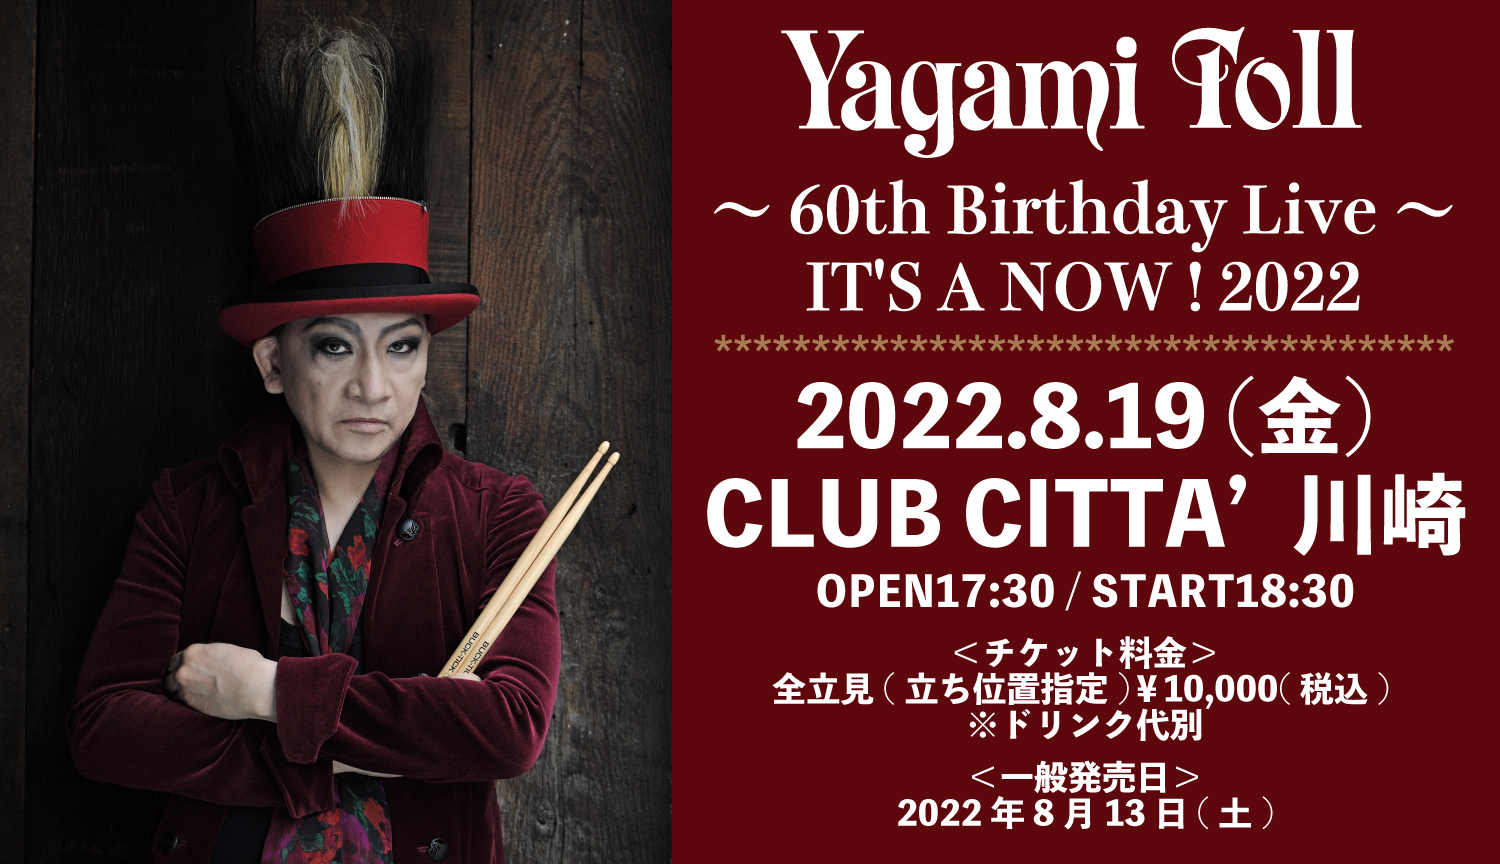 Yagami Toll ～60th Birthday Live～ IT'S A NOW！2022